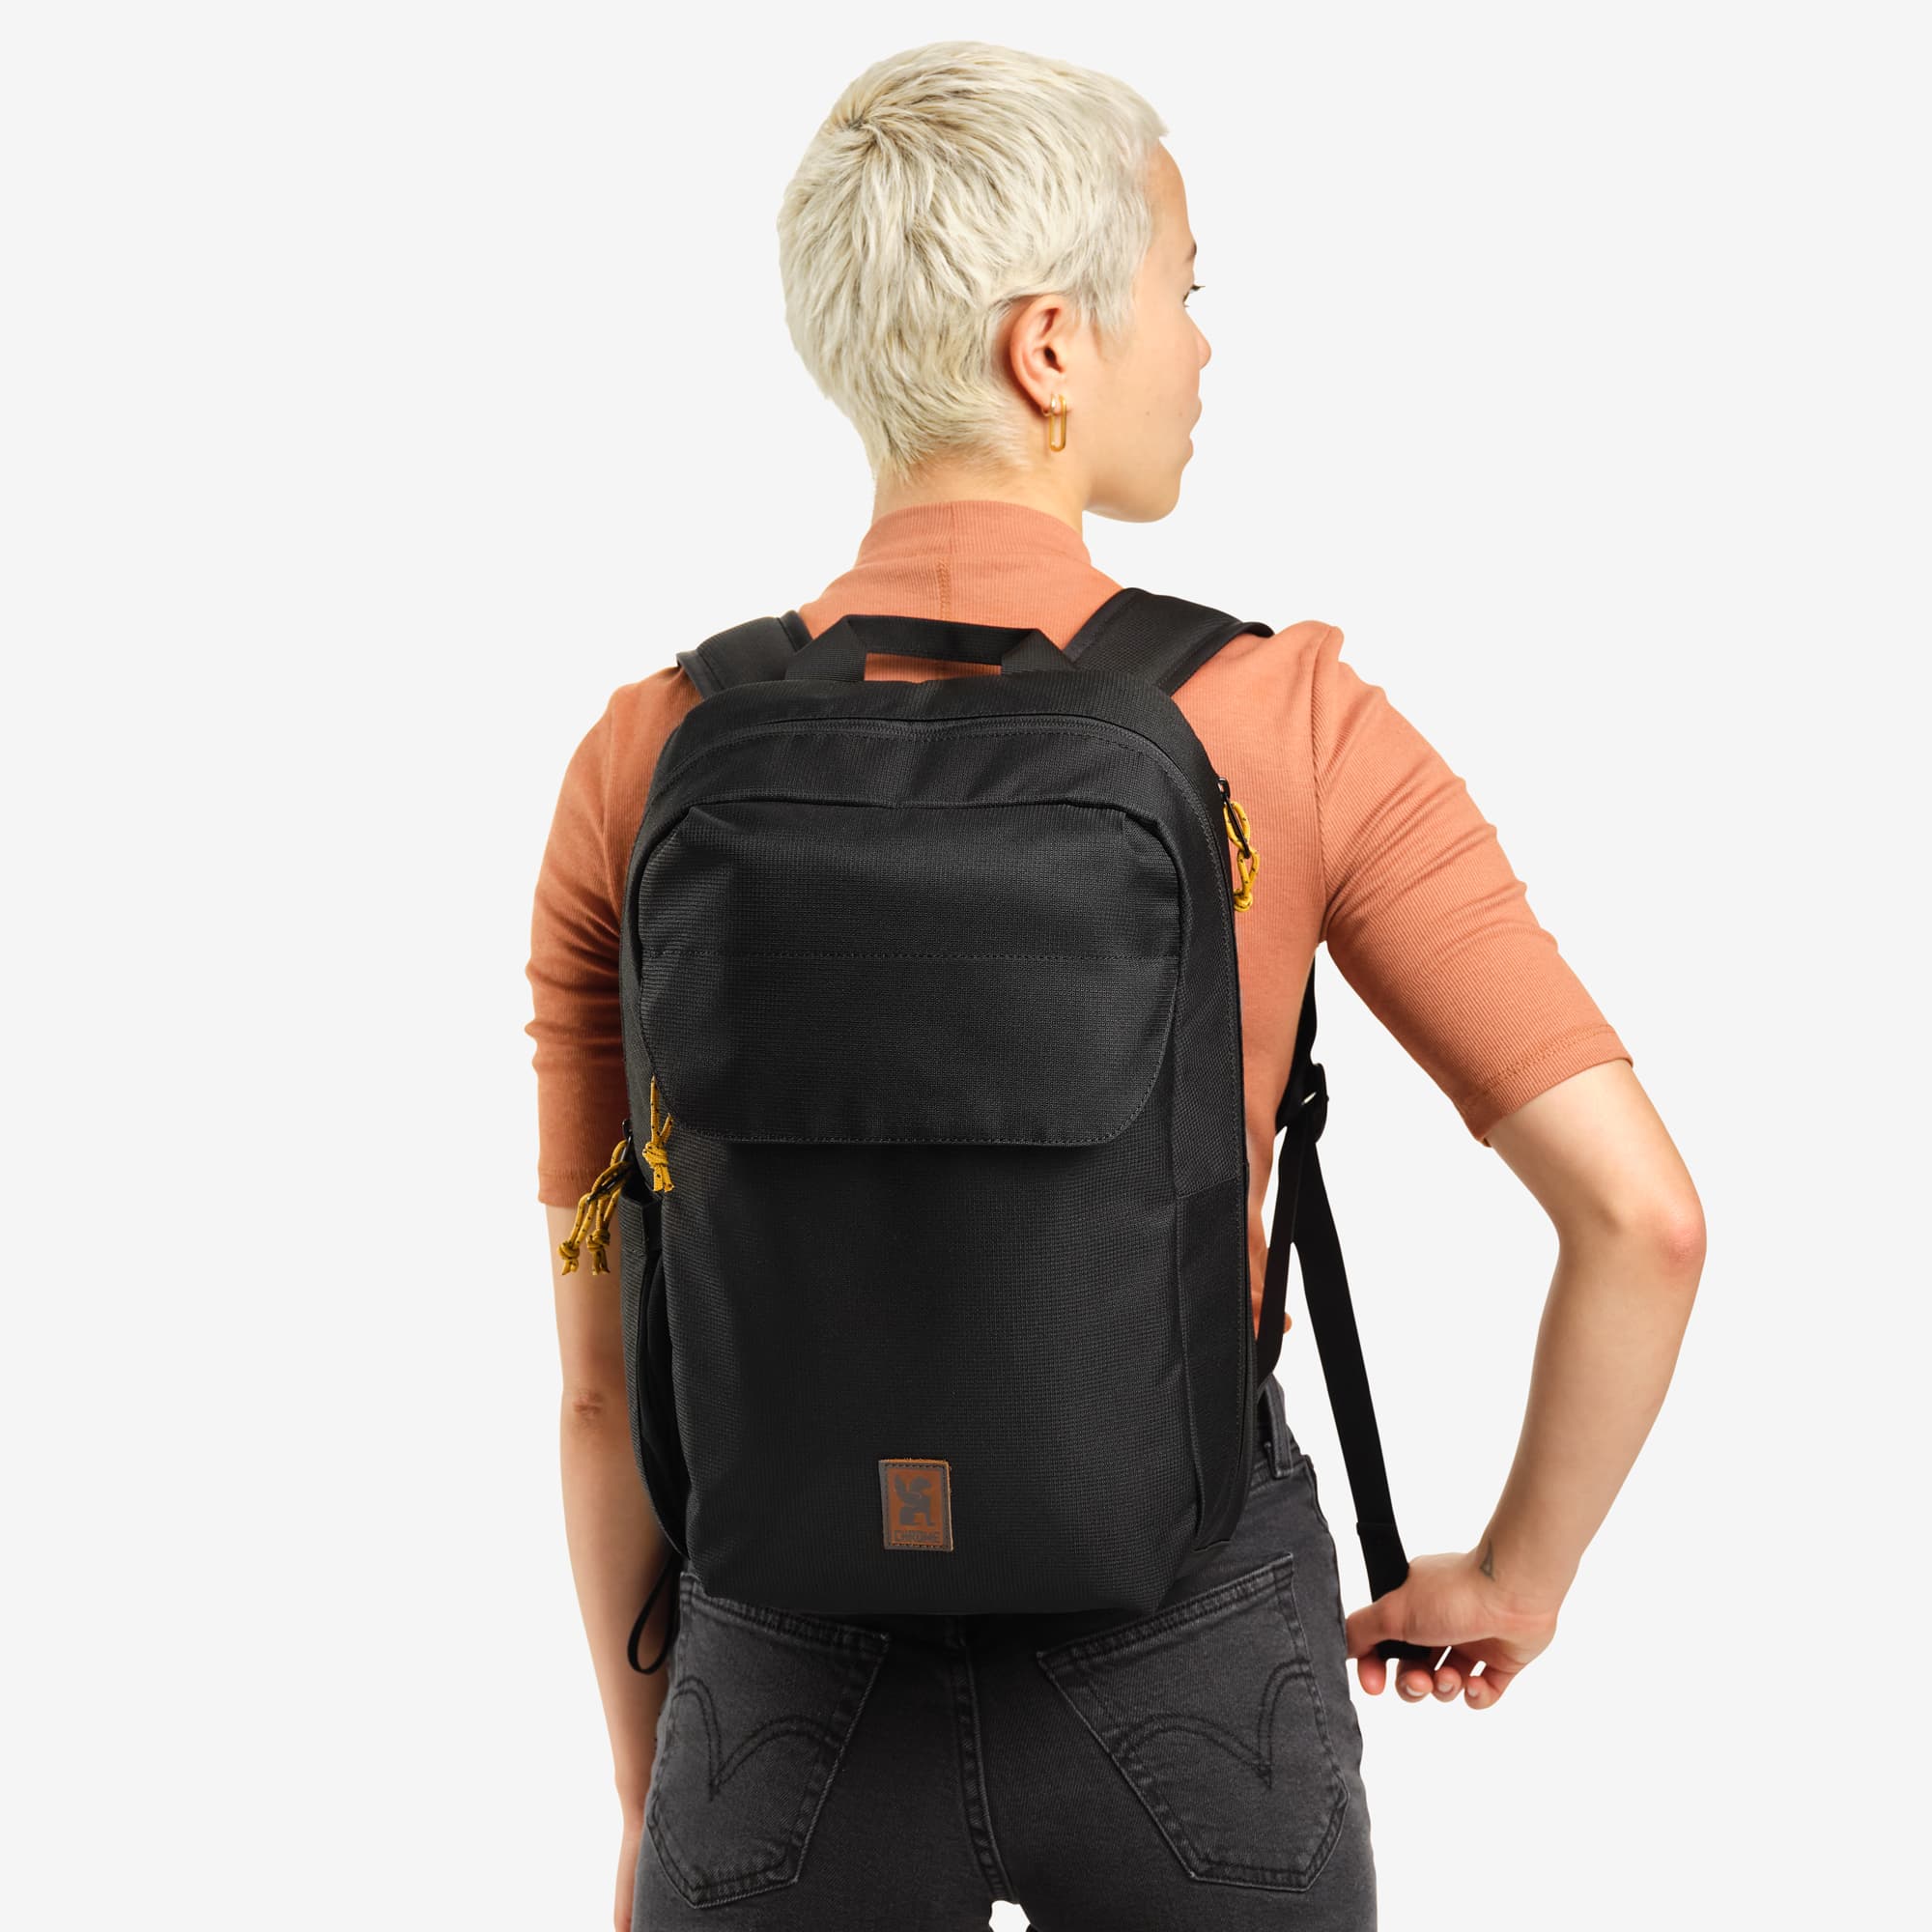 Ruckas 14L Backpack in black worn by a woman